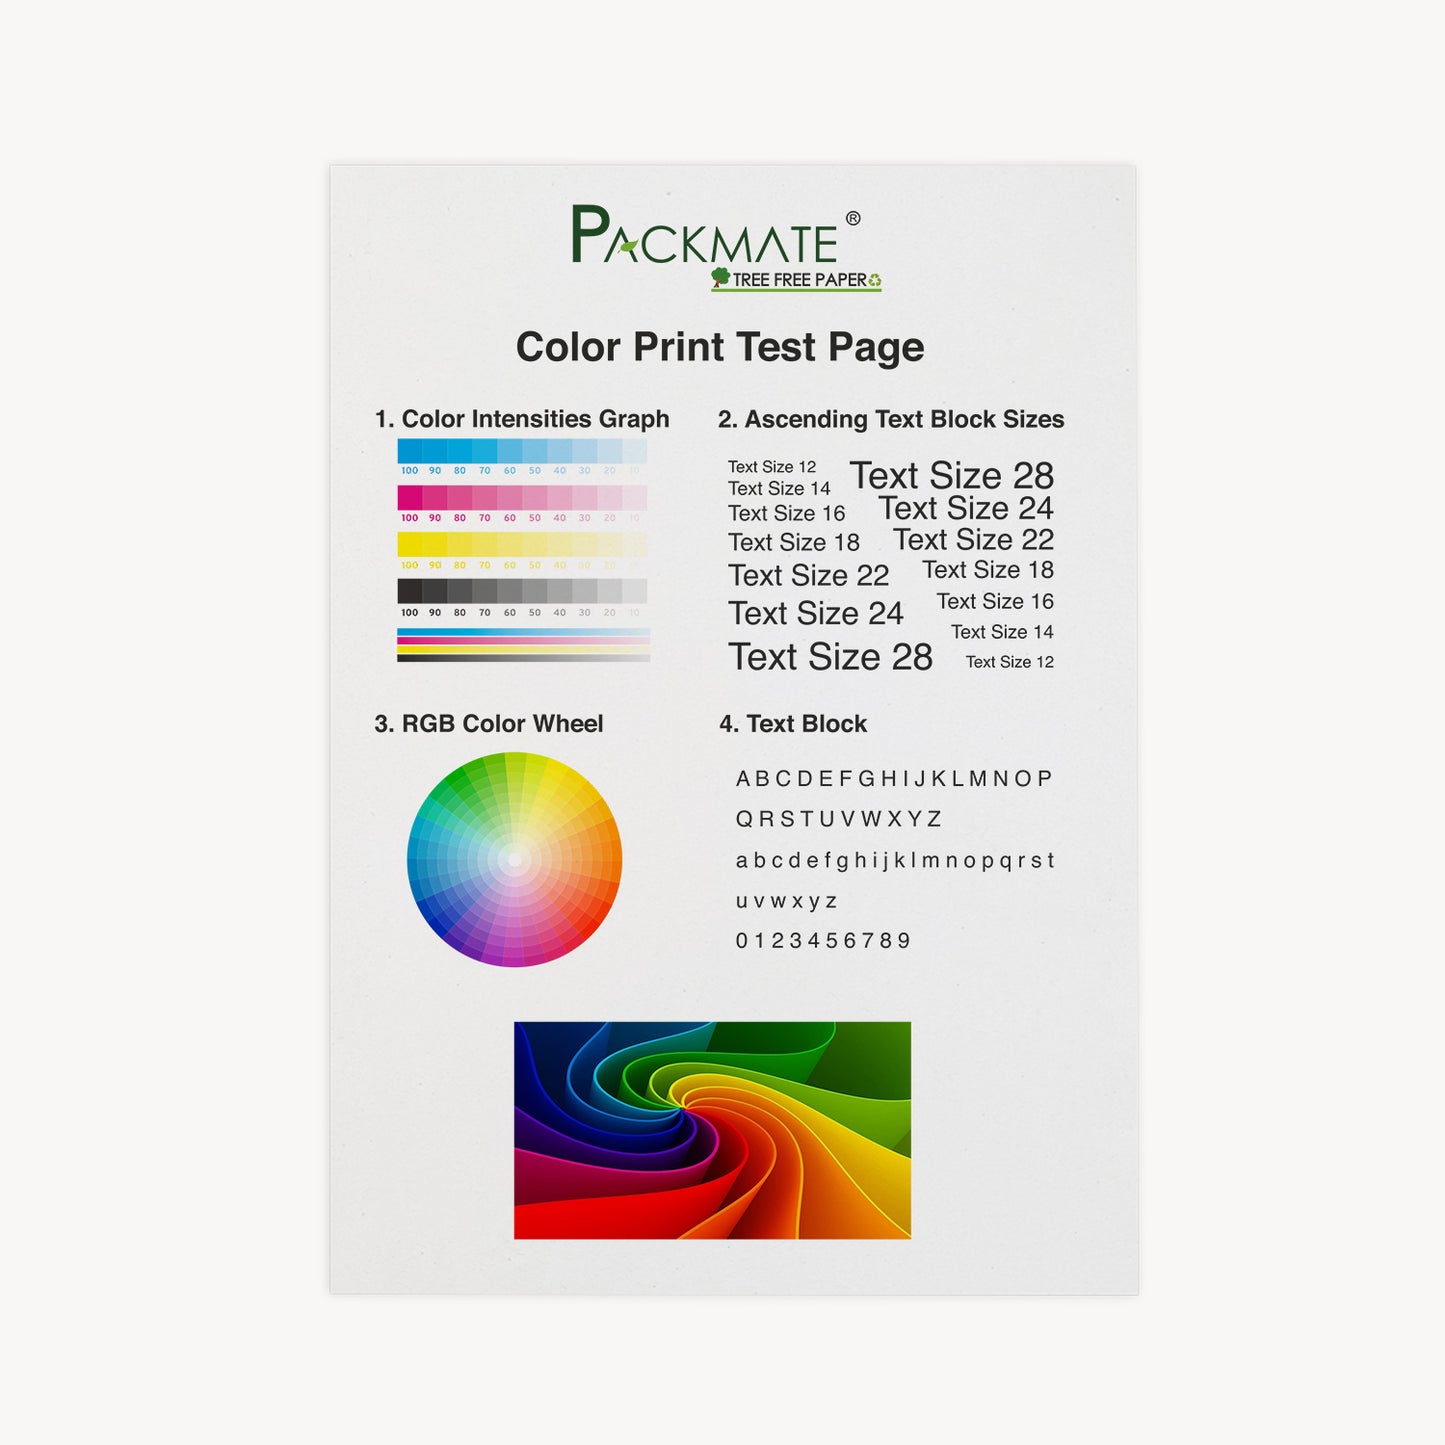 Packmate Silvercote A5 Copier, 1 Ream, 500 Sheets (Pack of 2)  Made From 100% Recycled Paper